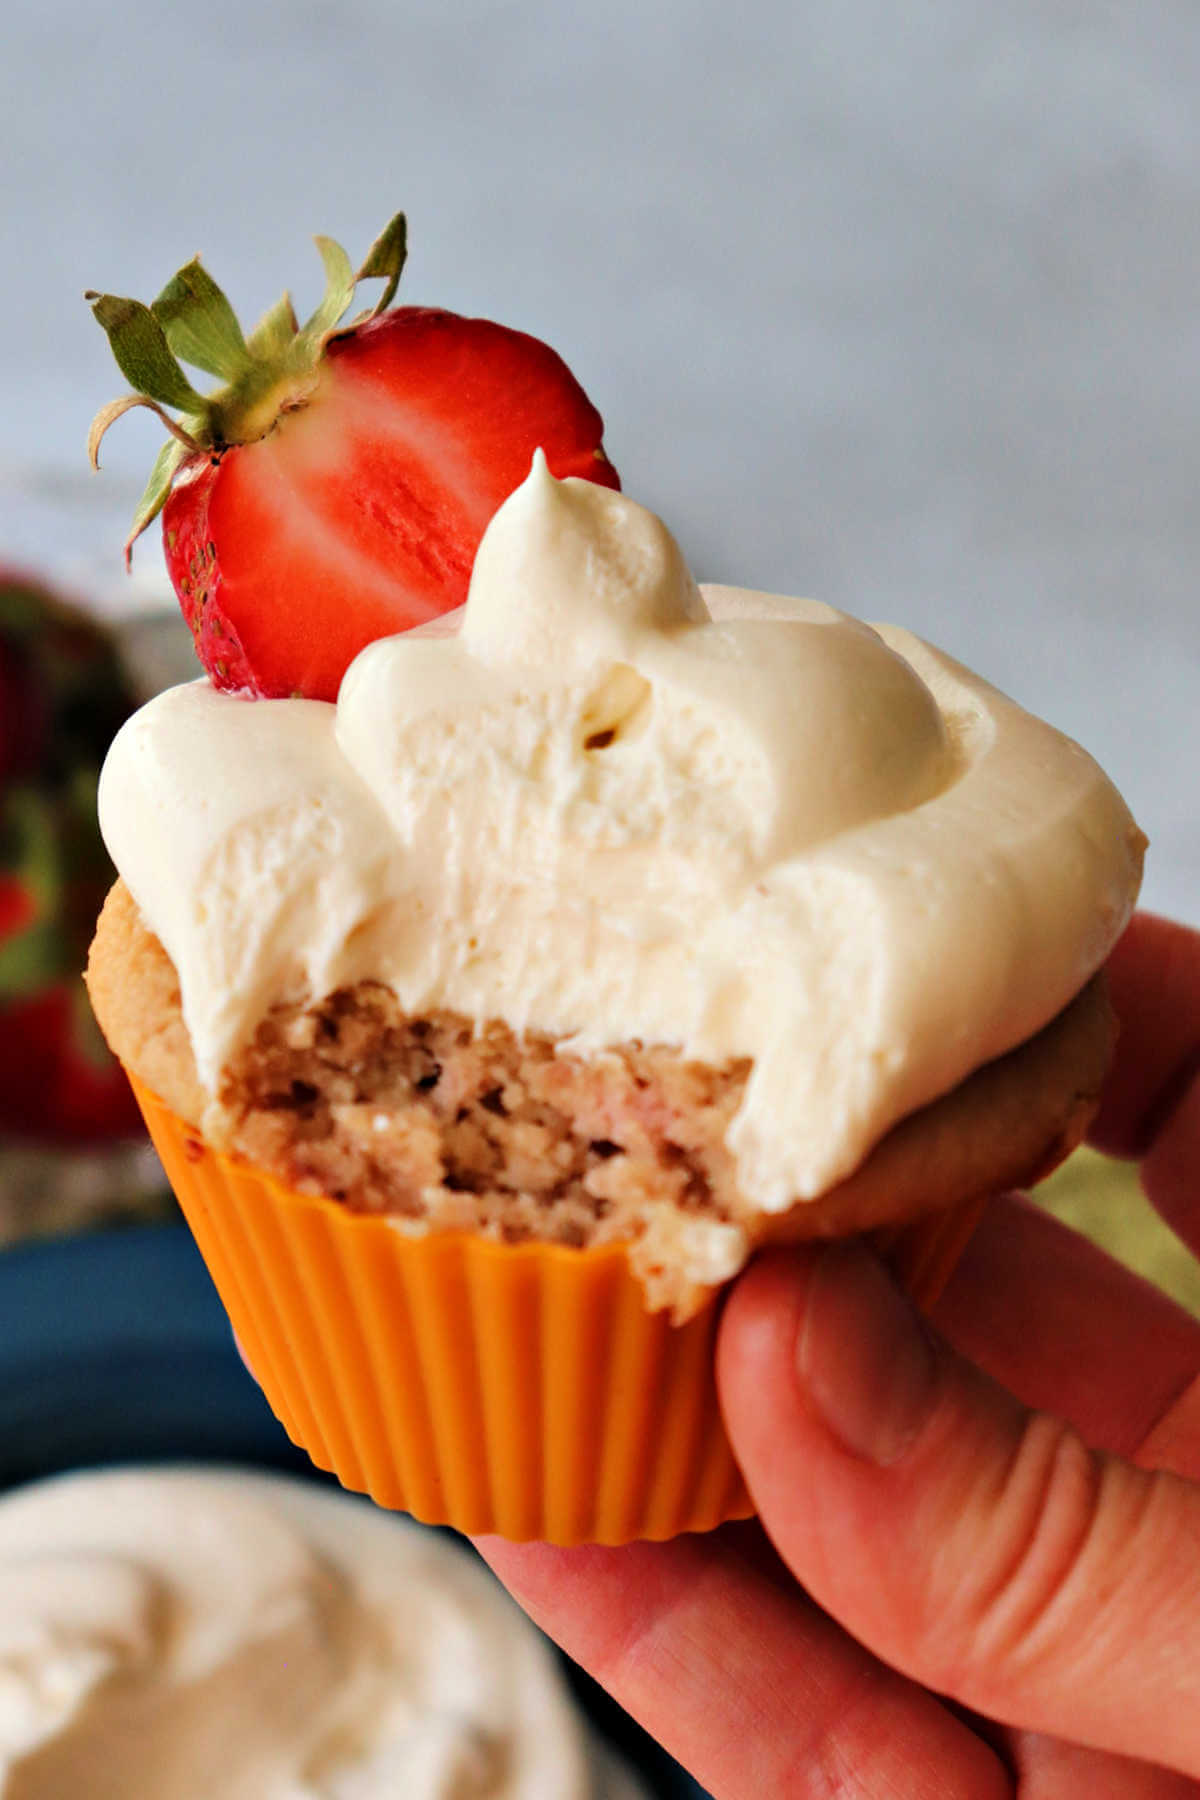 Delicious keto cream cheese frosting on a low carb strawberry cupcake.